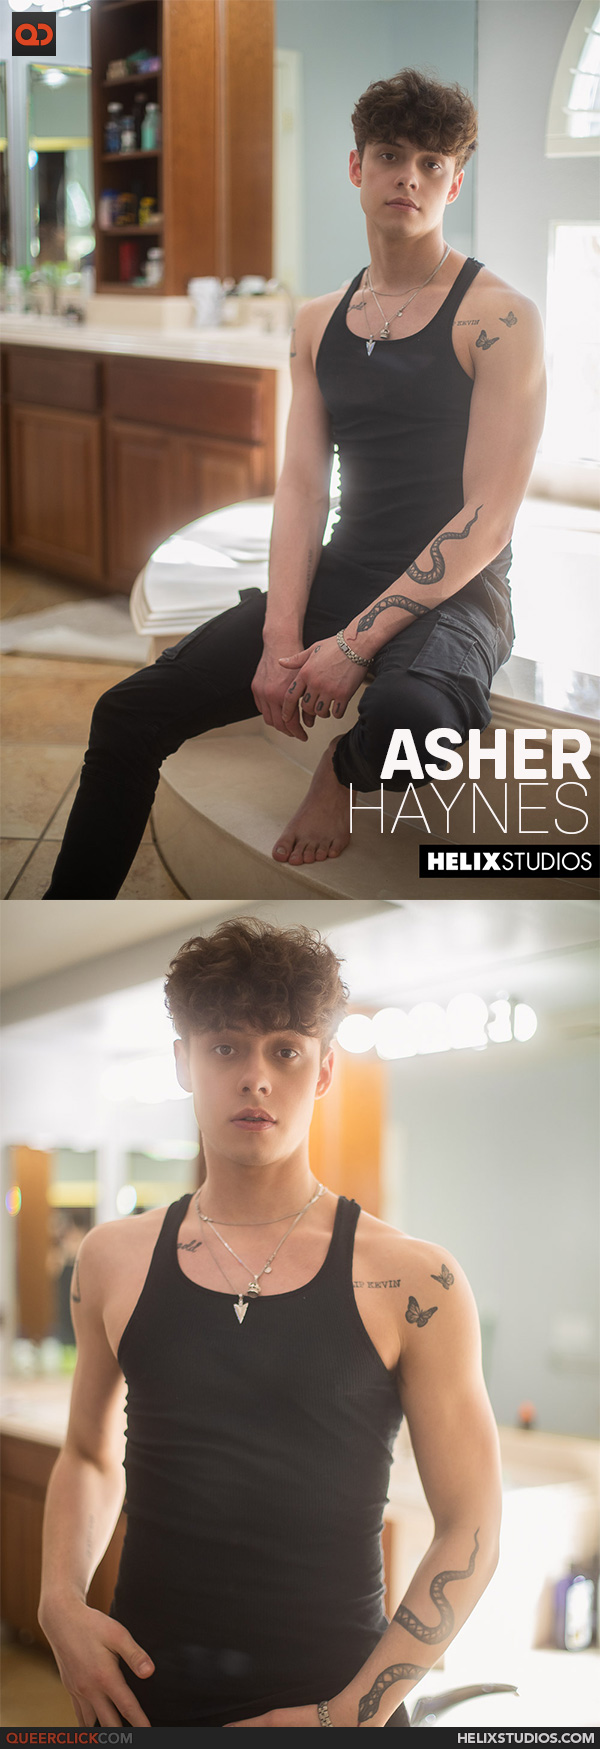 Helix Studios: Asher Haynes - Solo Session